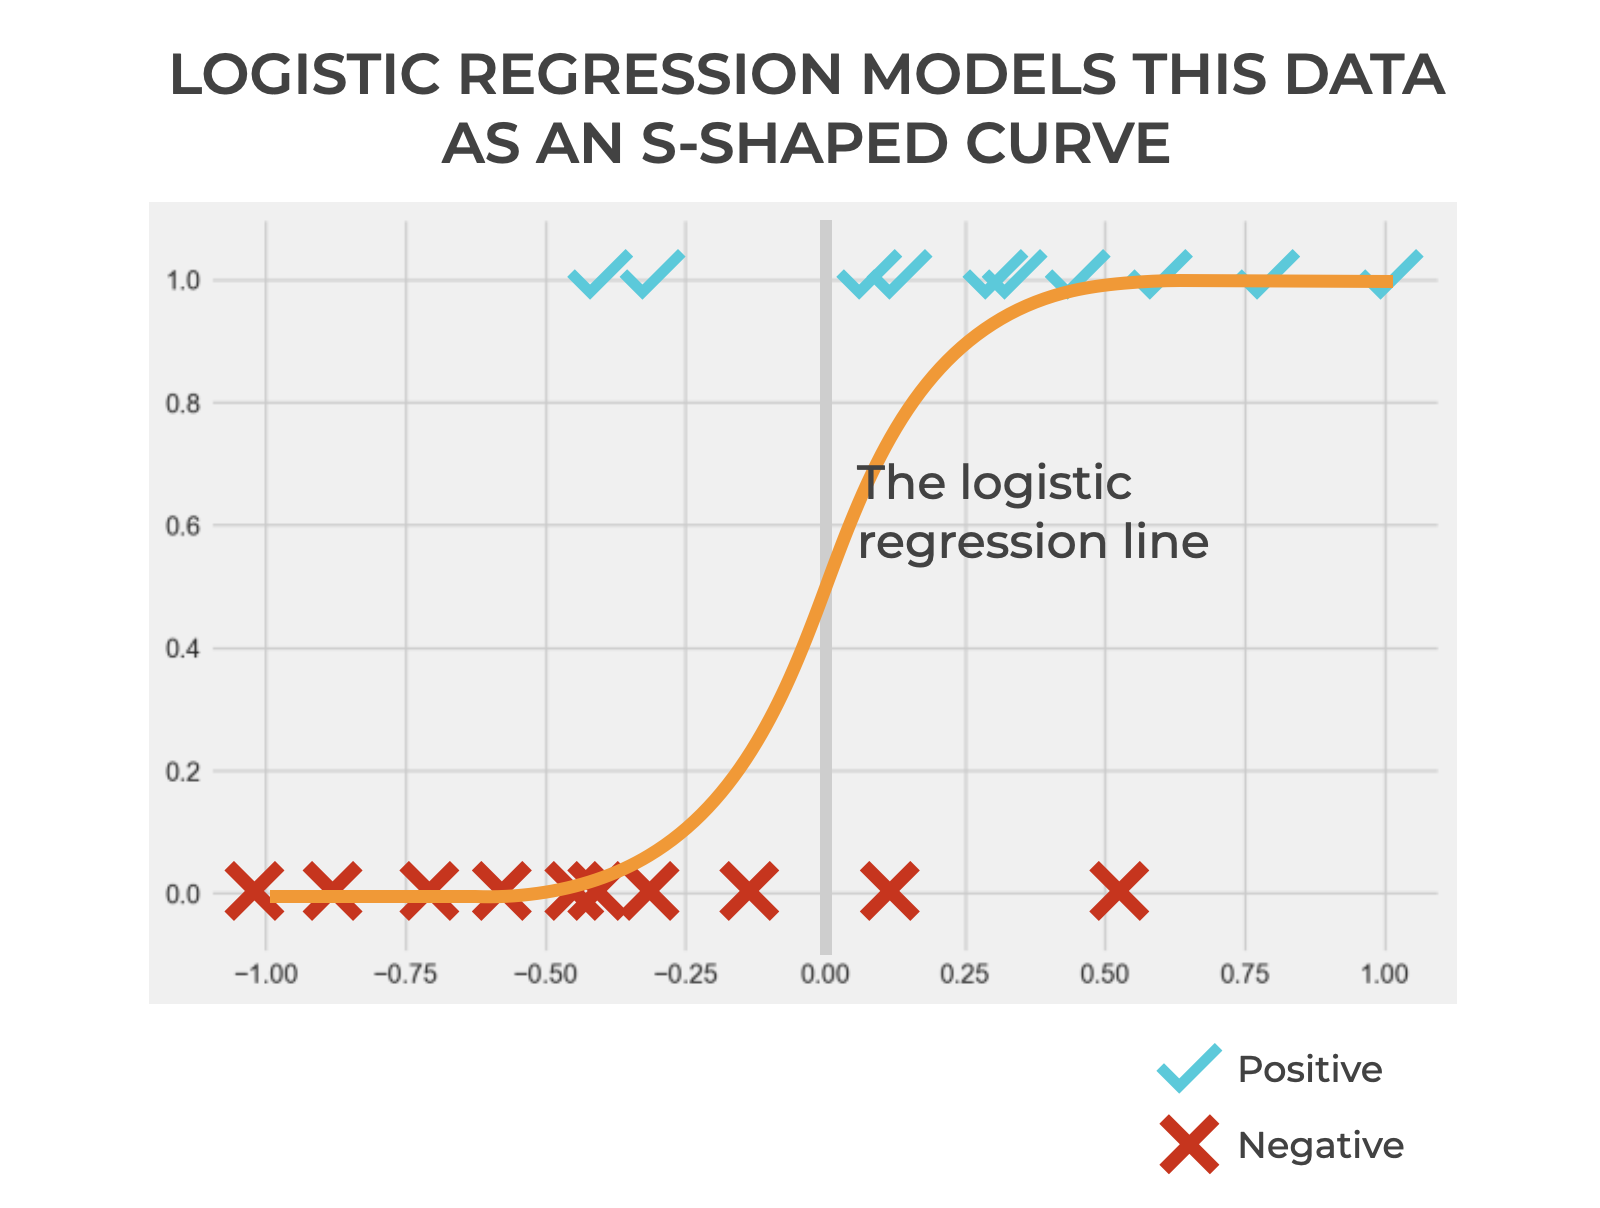 An image that shows logistic regression modeling some binary training data as an s-shaped curve.